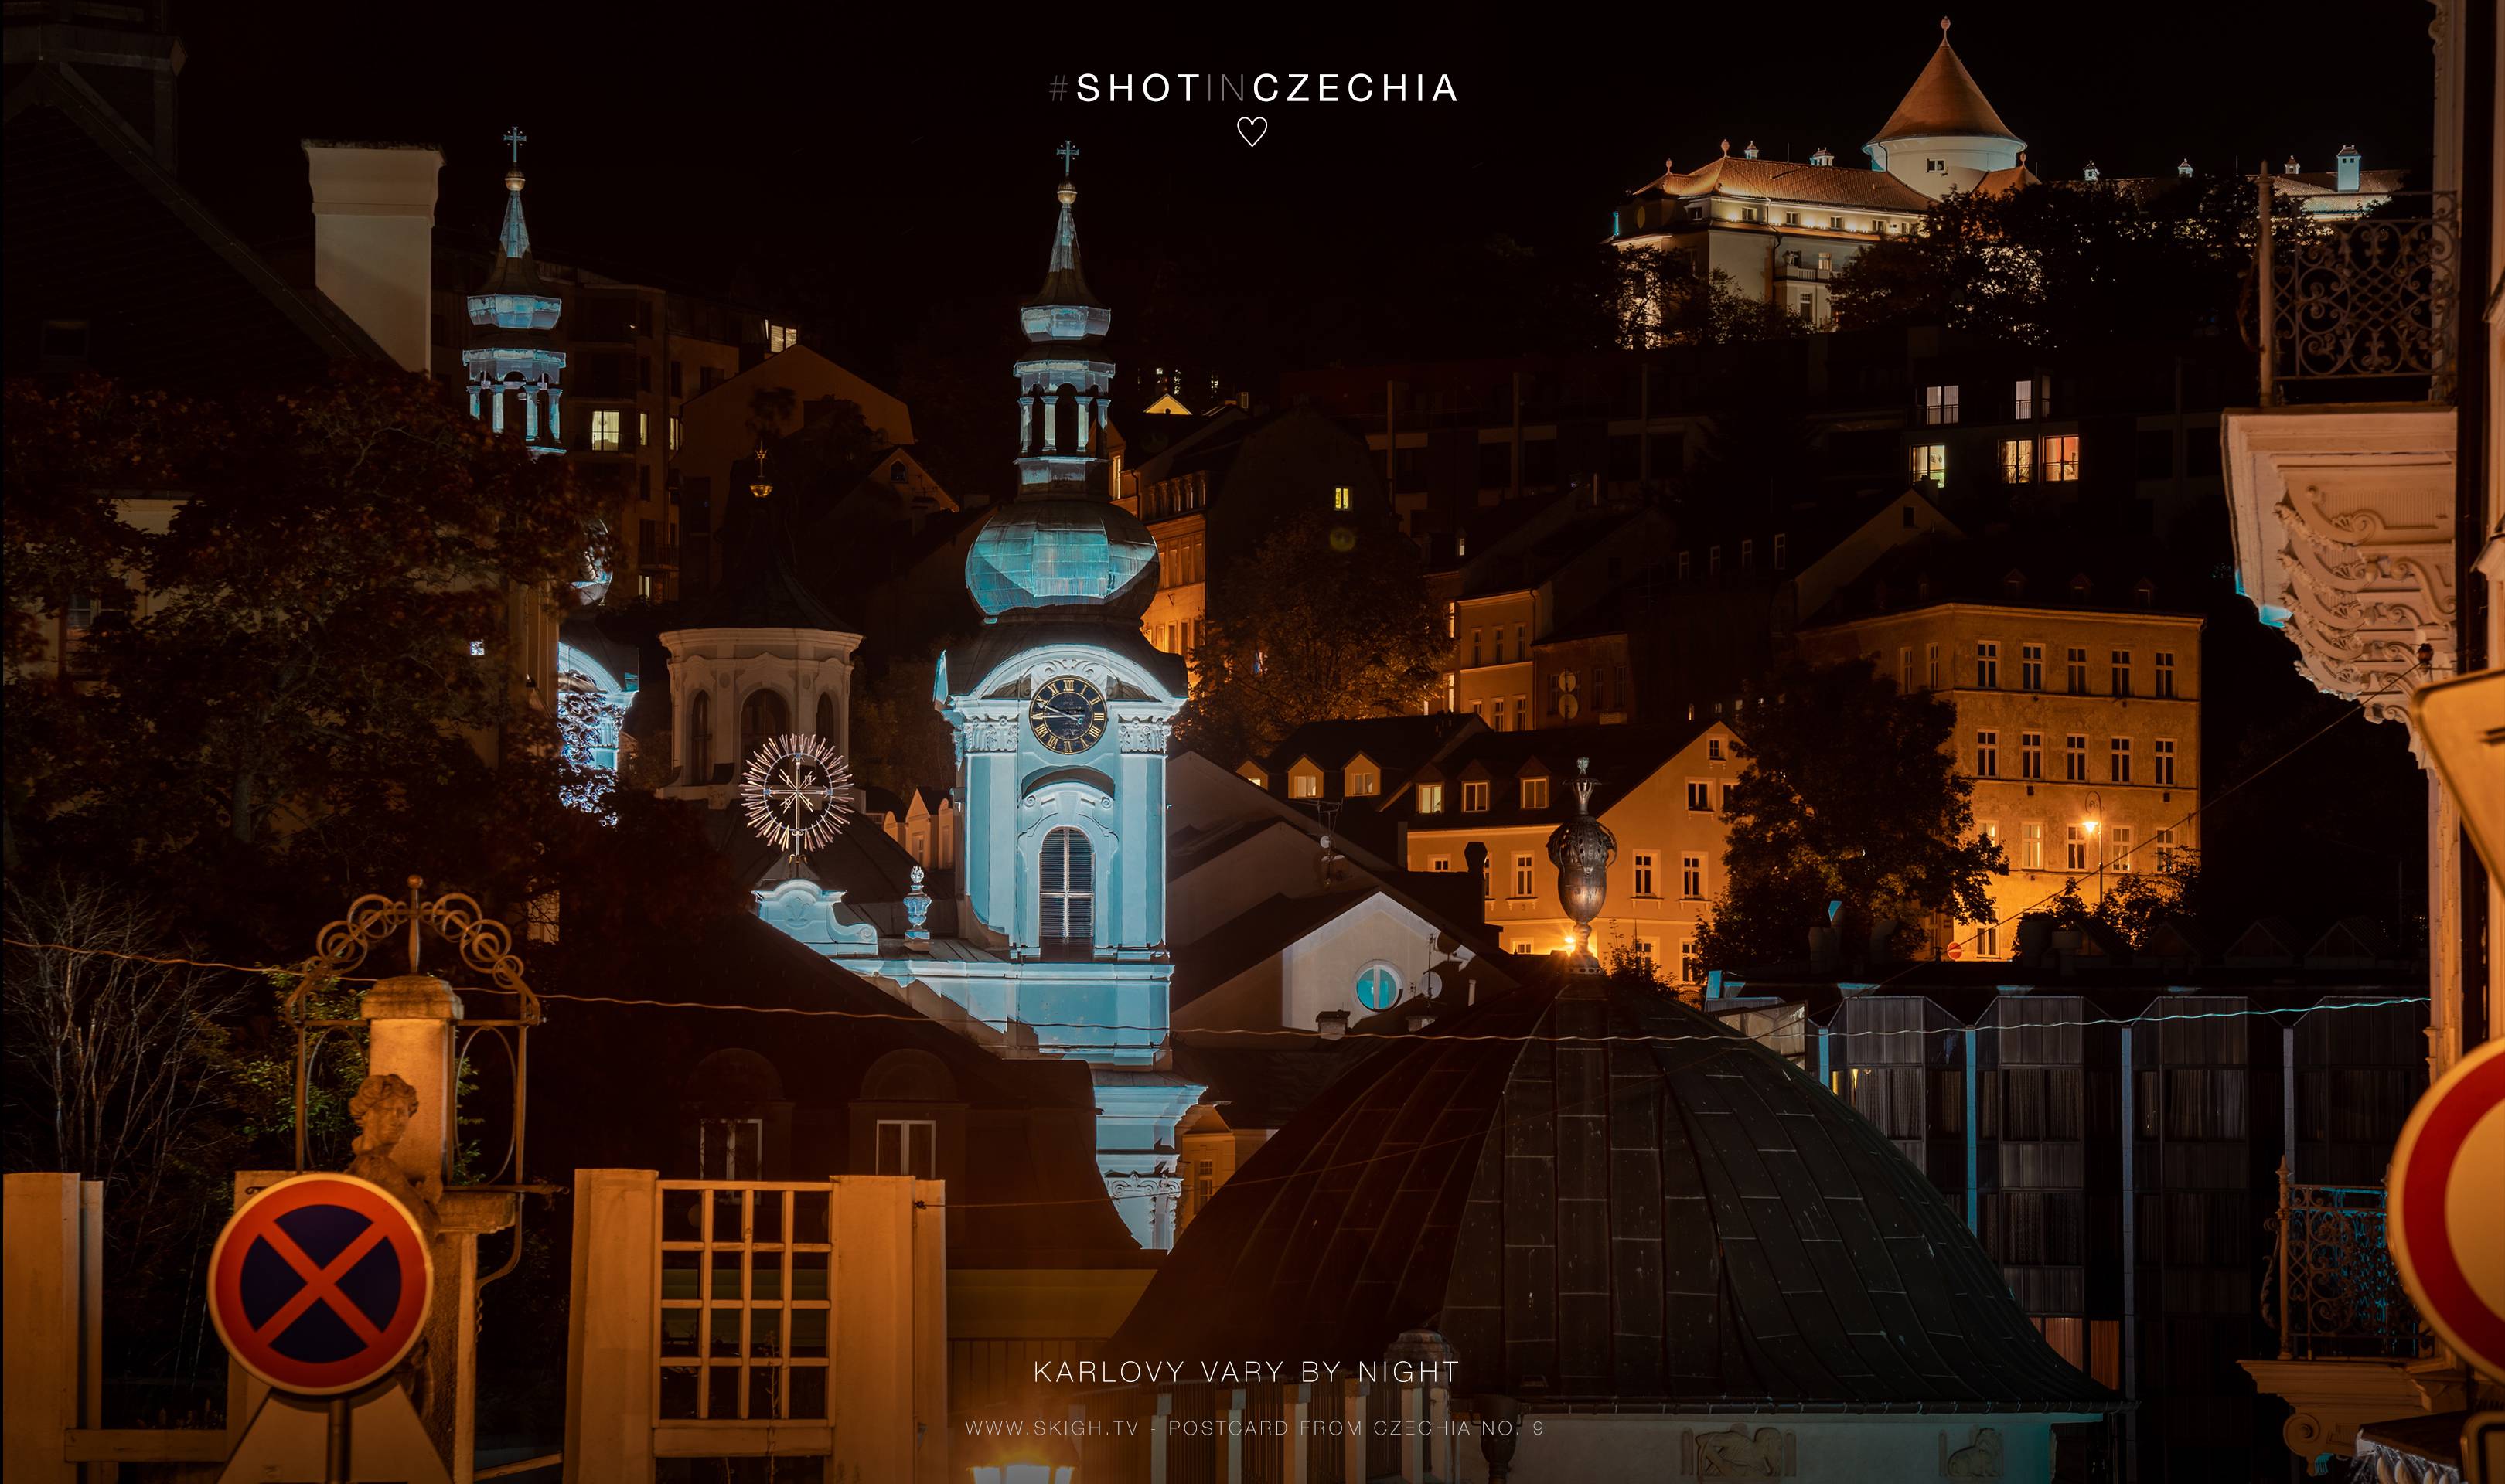 Above the roofs of Karlovy Vary